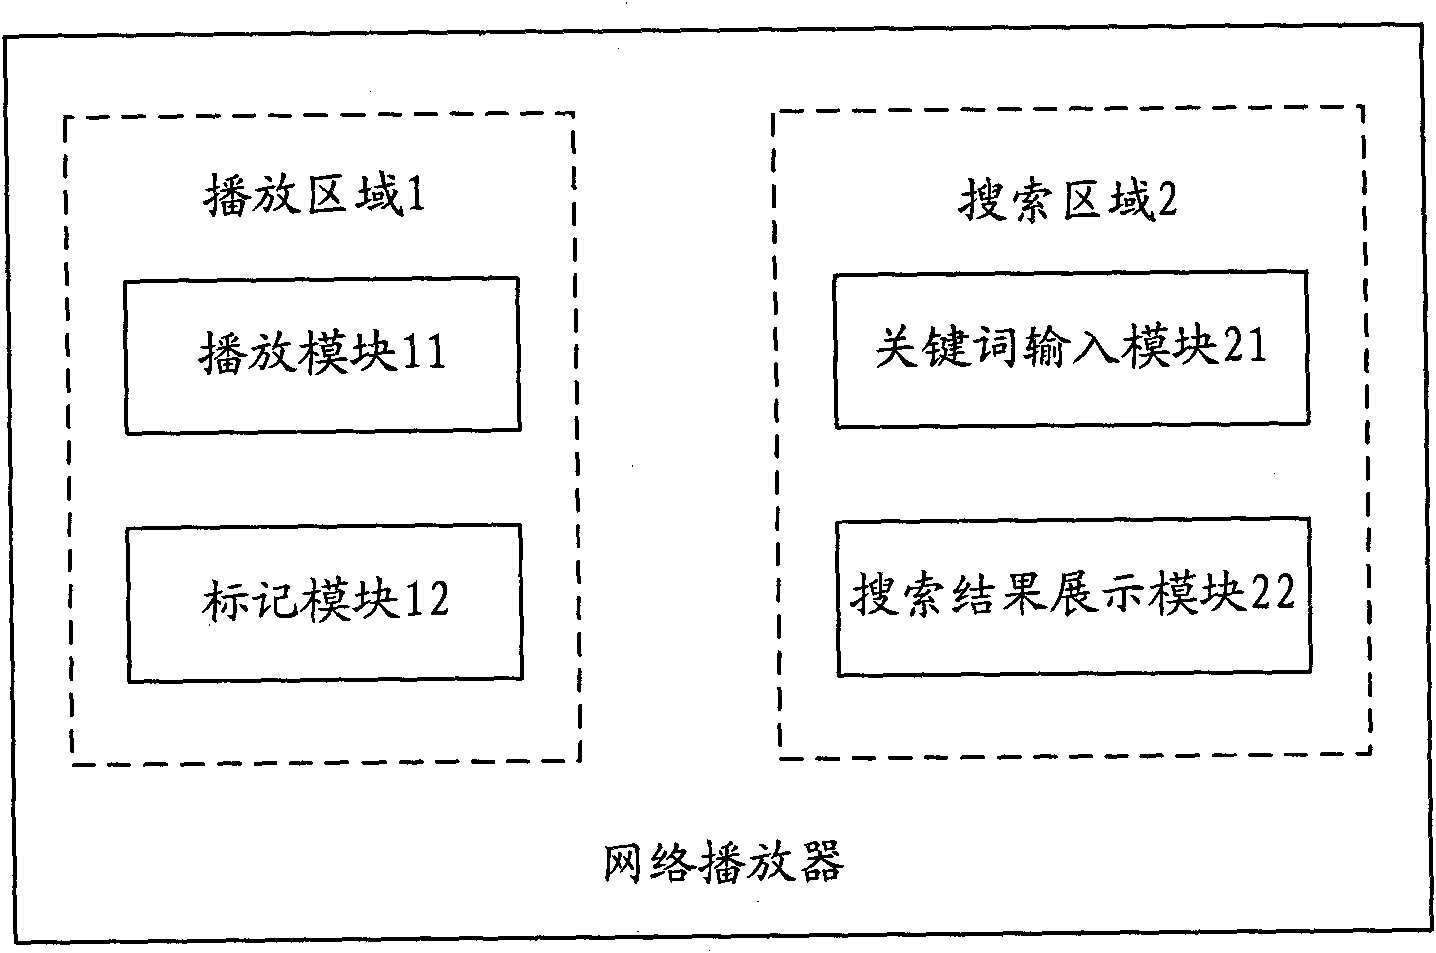 Network player and server for providing search service